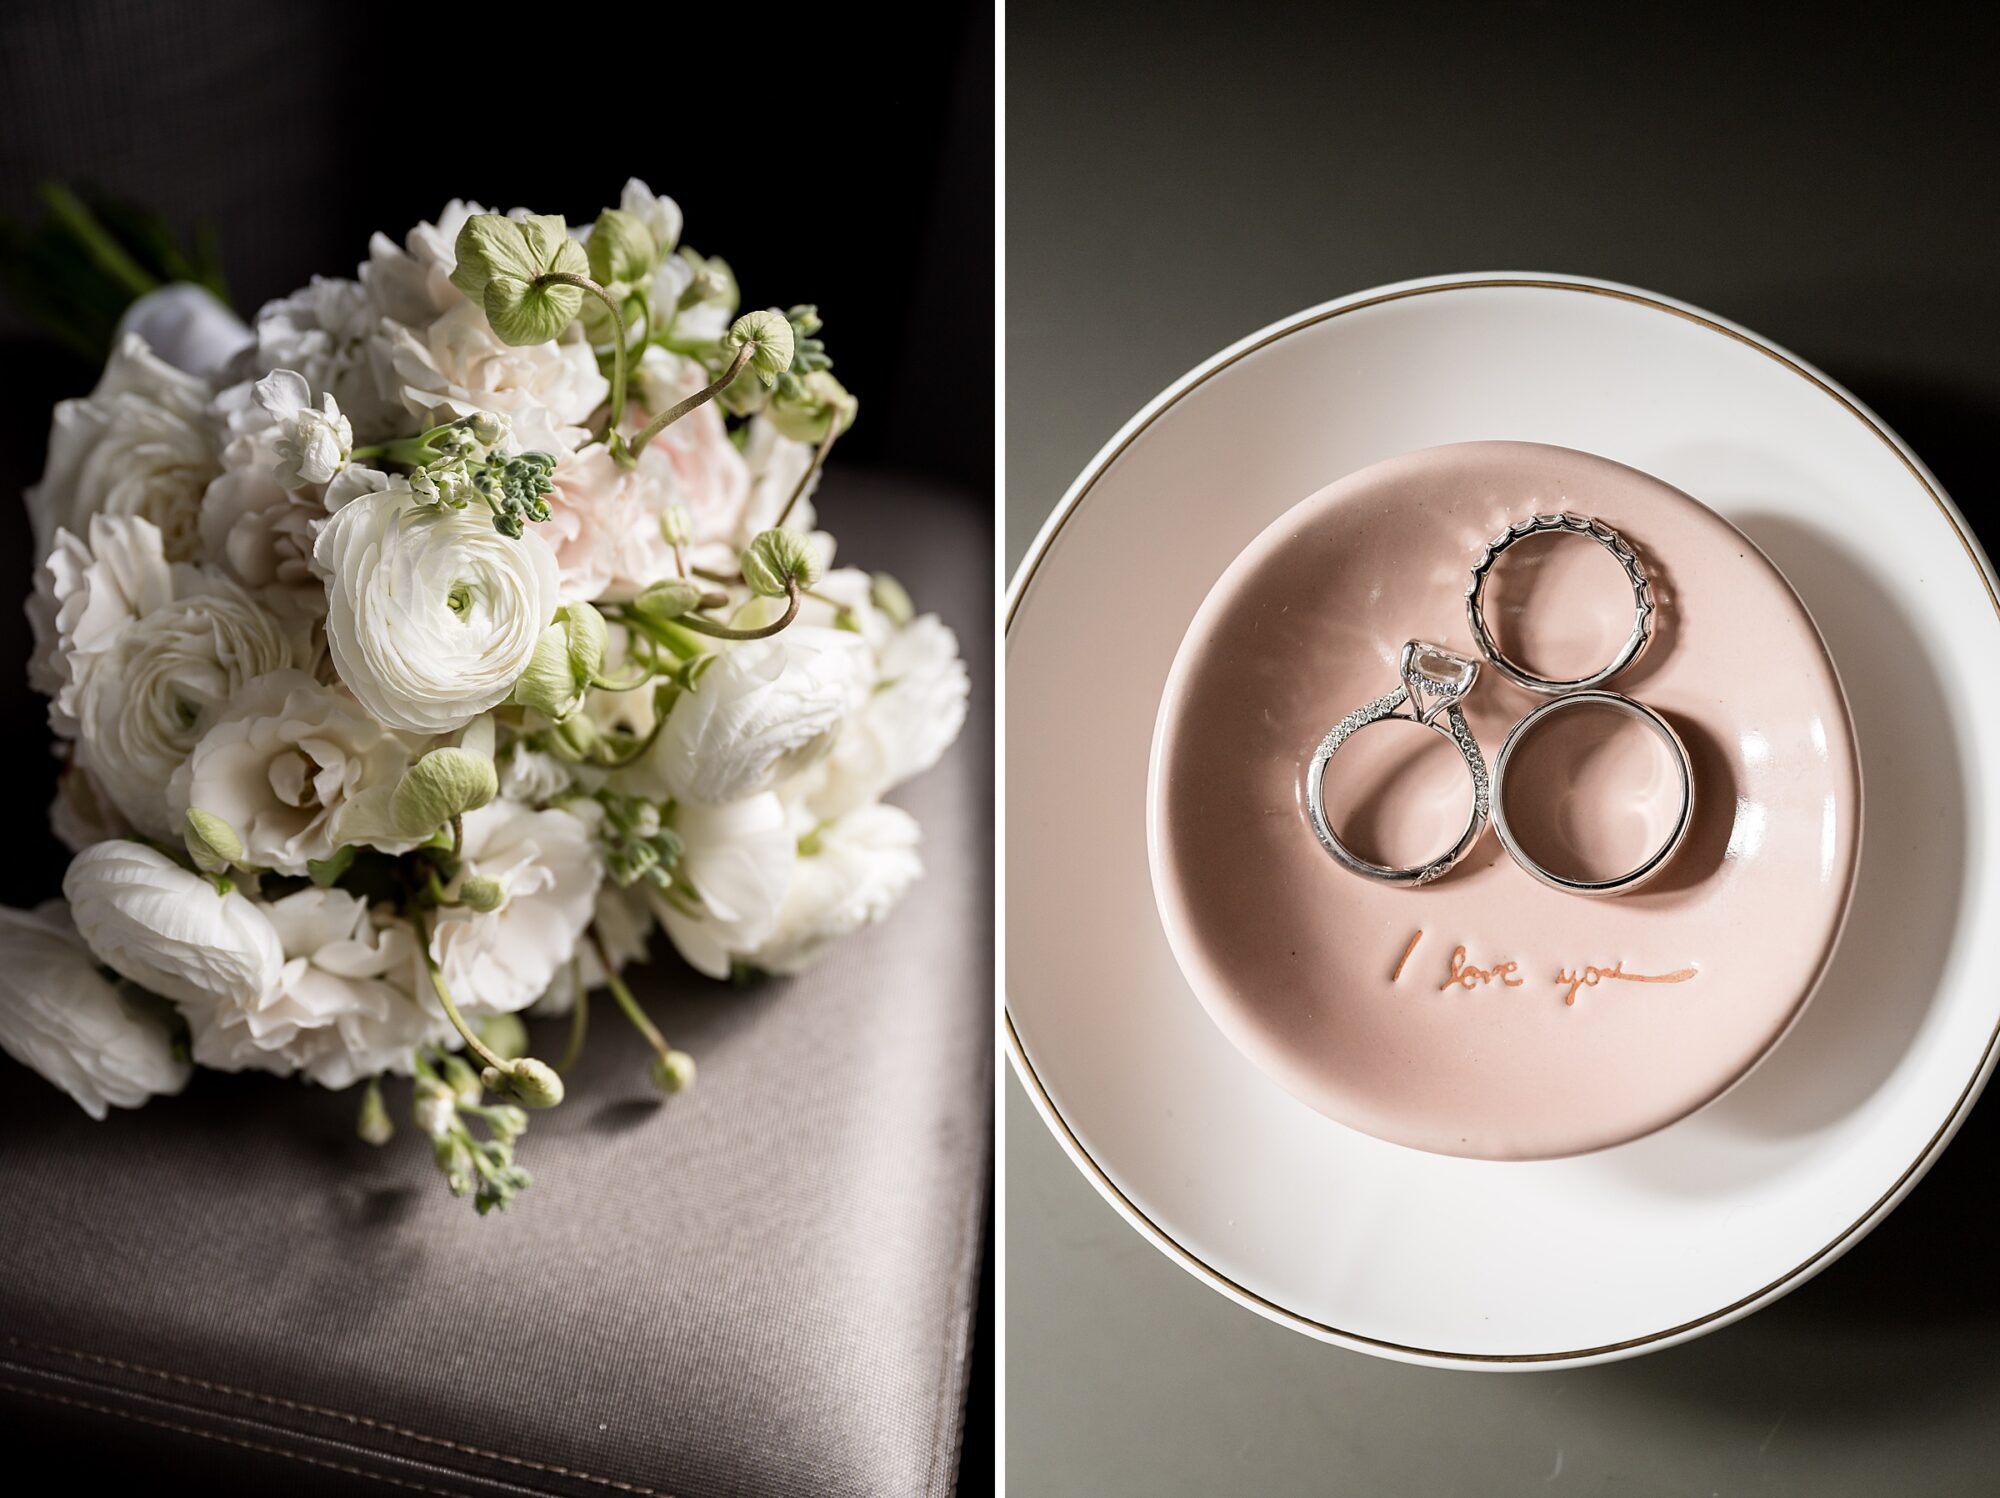 A wedding bouquet and wedding rings on a pink plate.